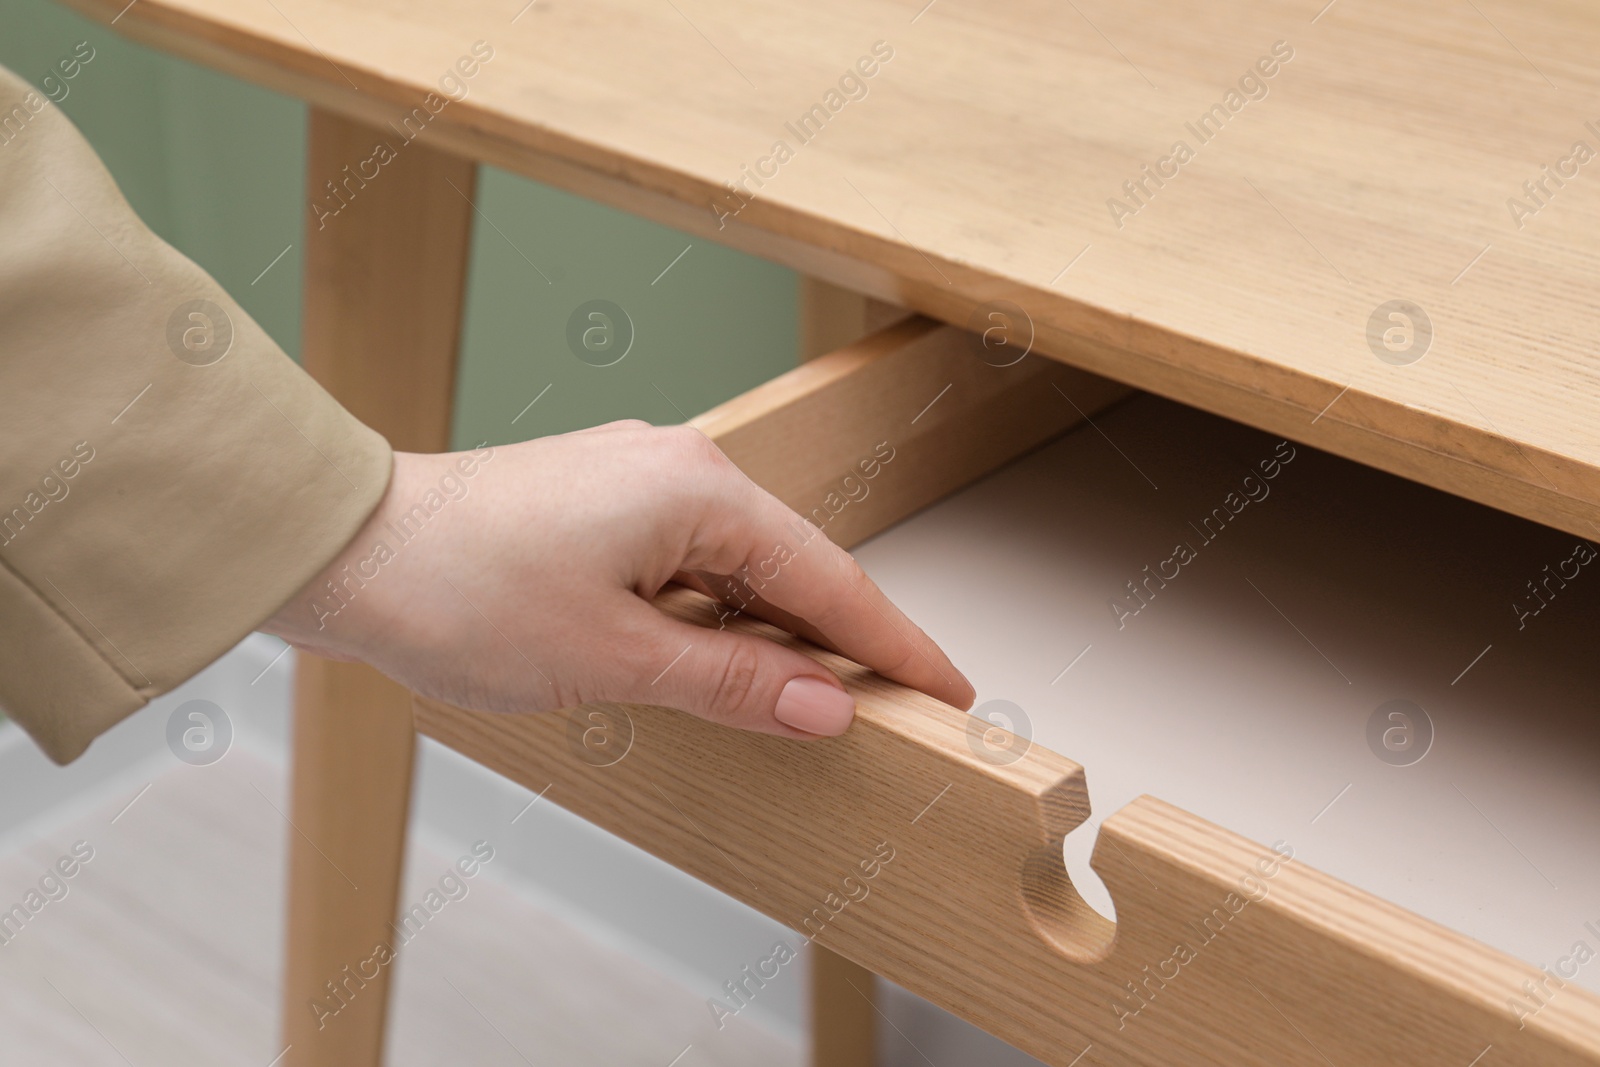 Photo of Woman opening empty desk drawer indoors, closeup view